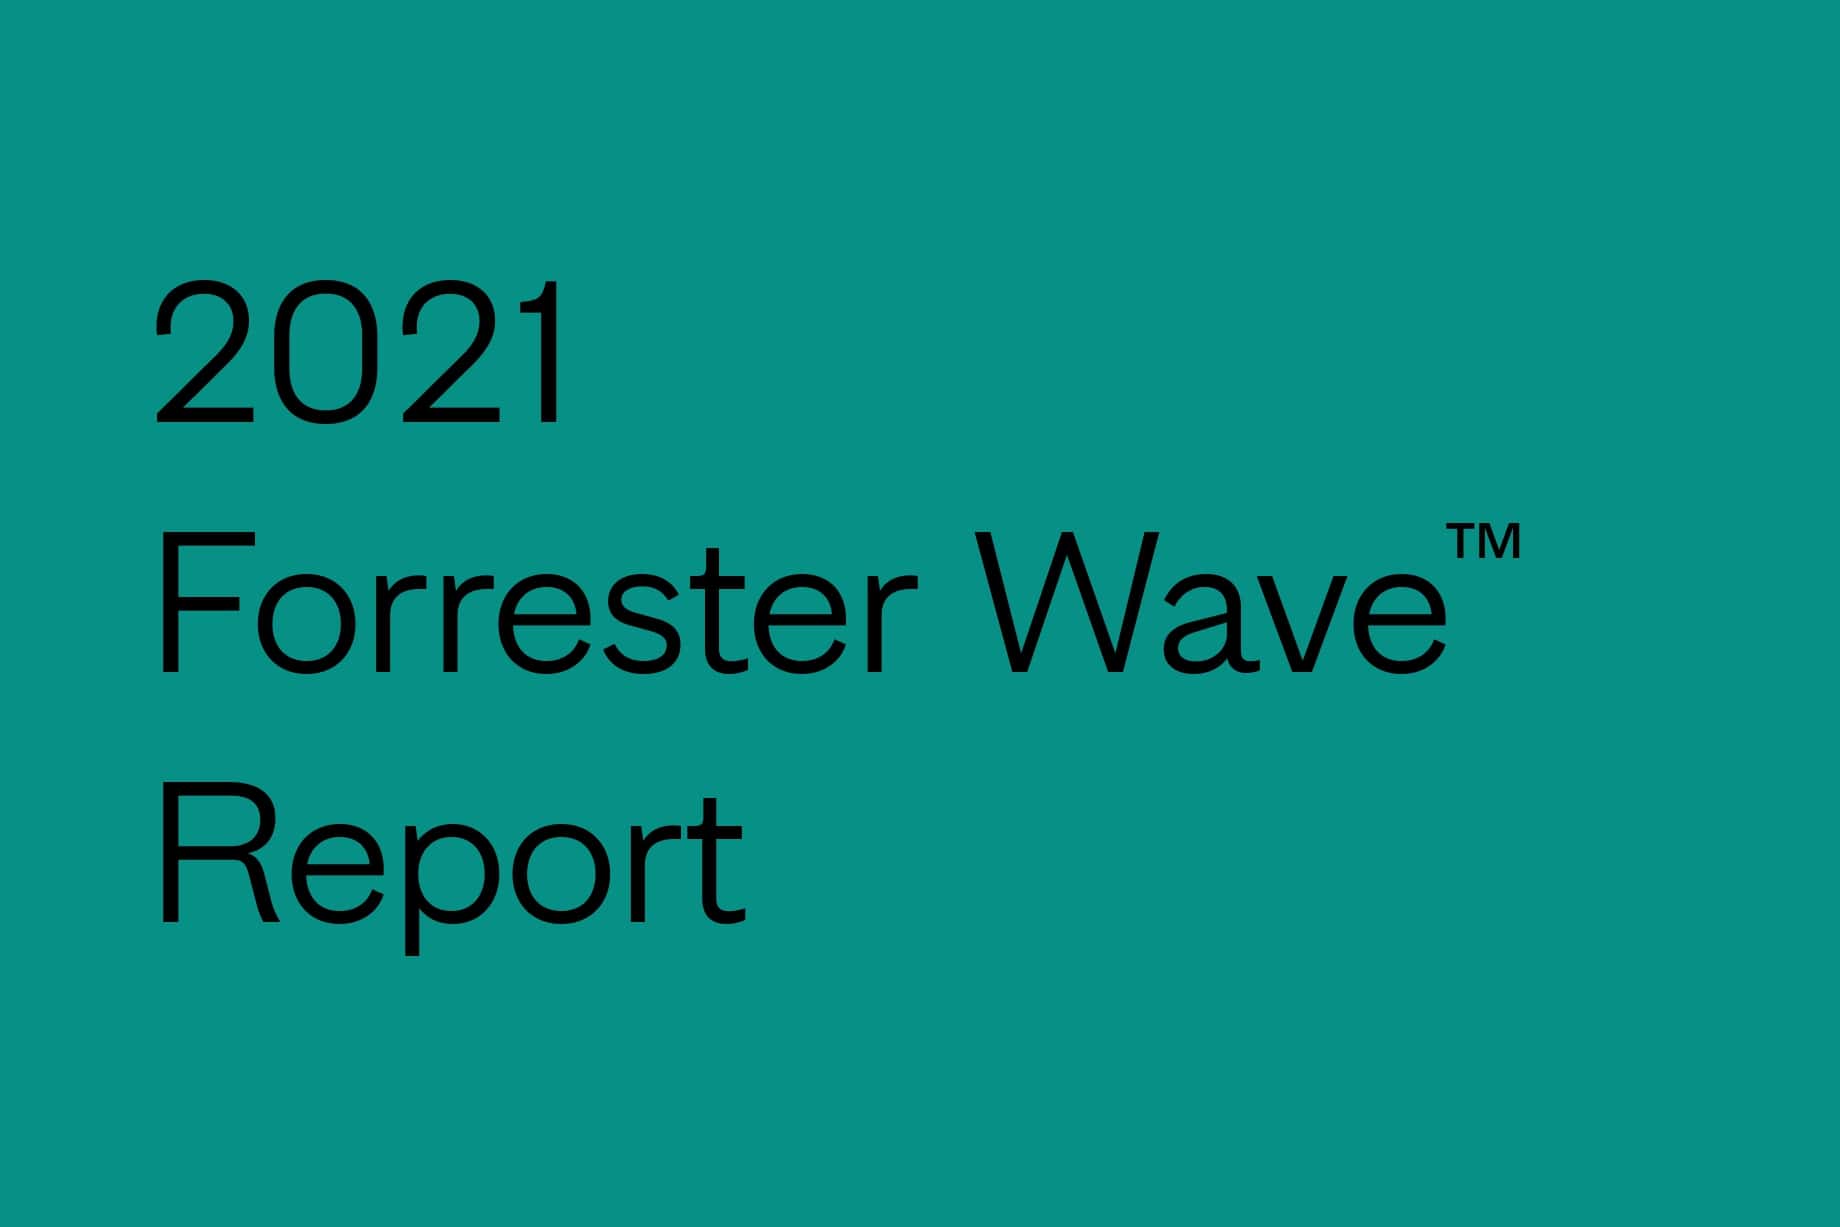 Human Insights, Brand Fidelity™ & The Key to True Loyalty: The 2021 Forrester Wave™ Report